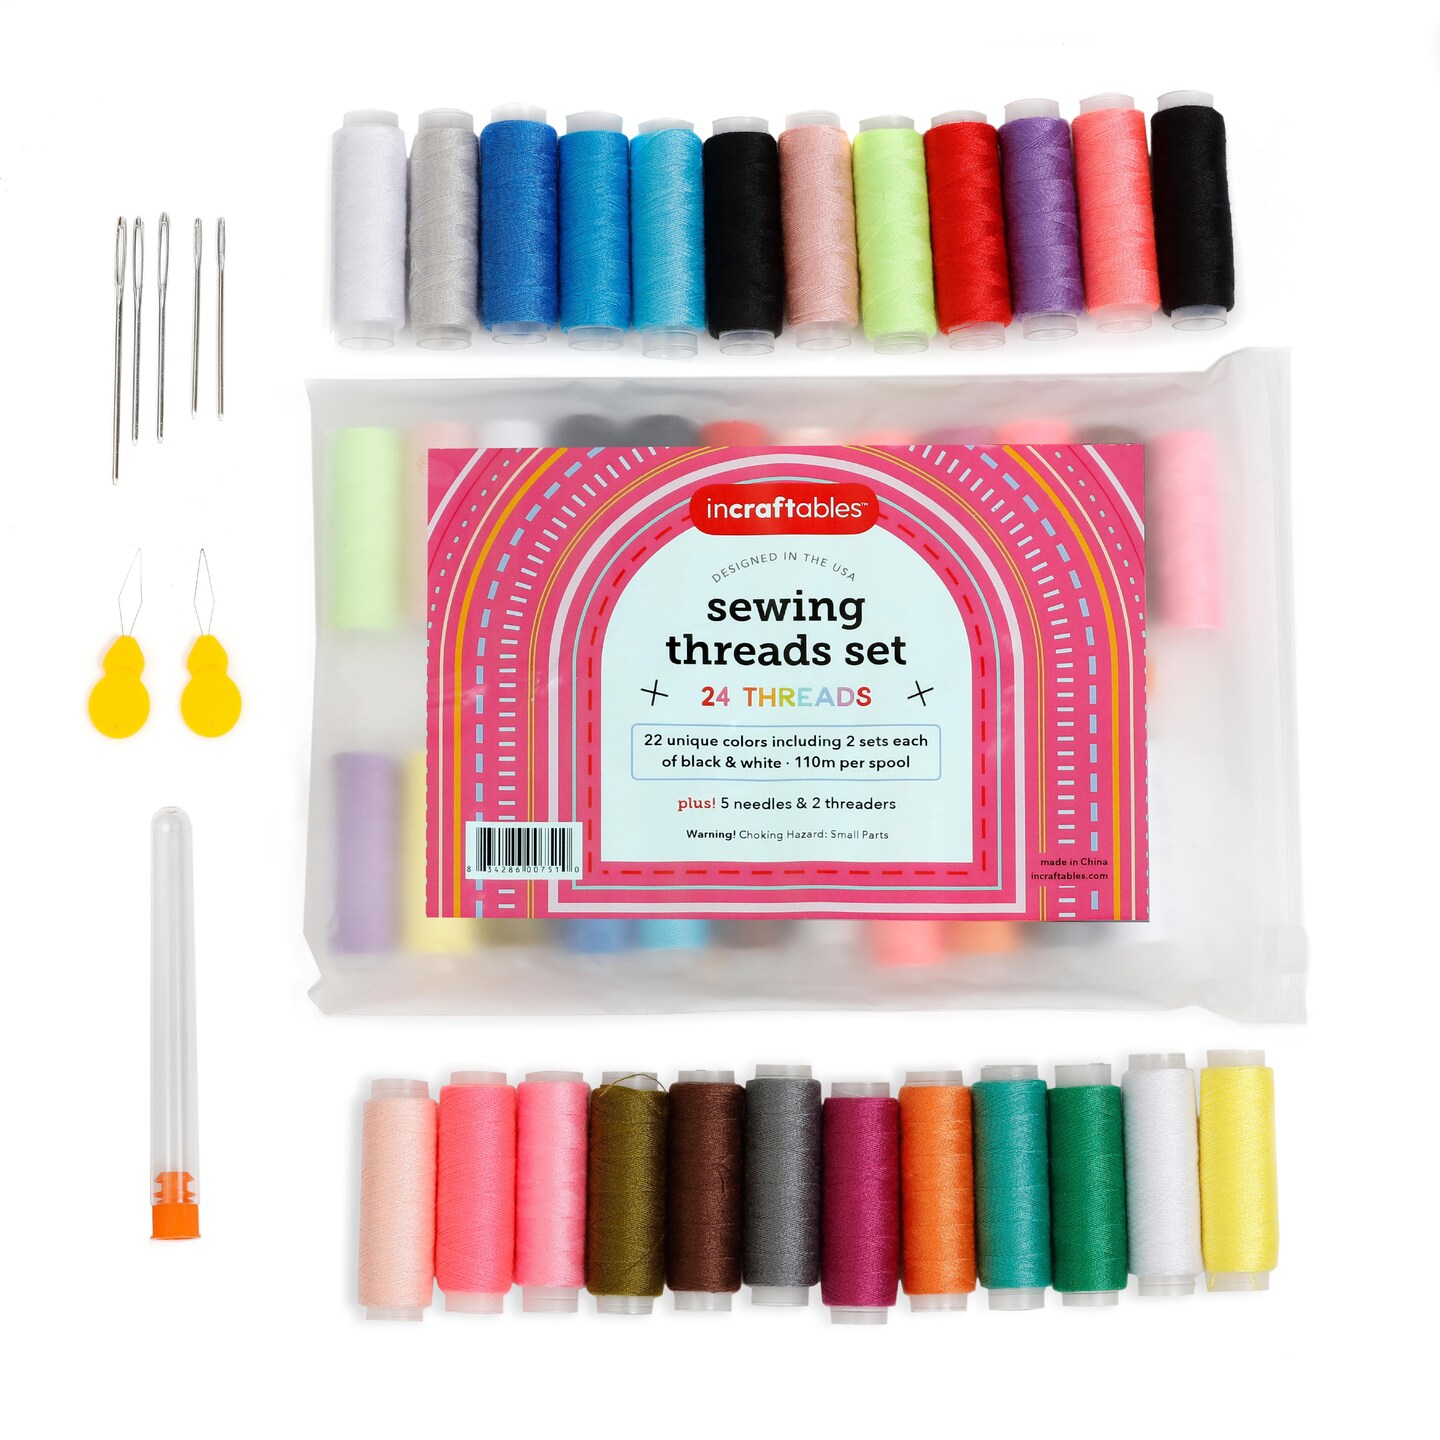 Incraftables Sewing Thread Assortment (24 Threads Set). Best Quality Polyester Thread for Sewing Machine (360ft per Spool). All Purpose Sewing Thread Kit for DIY Embroidery, Quilting &#x26; Hand Stitching